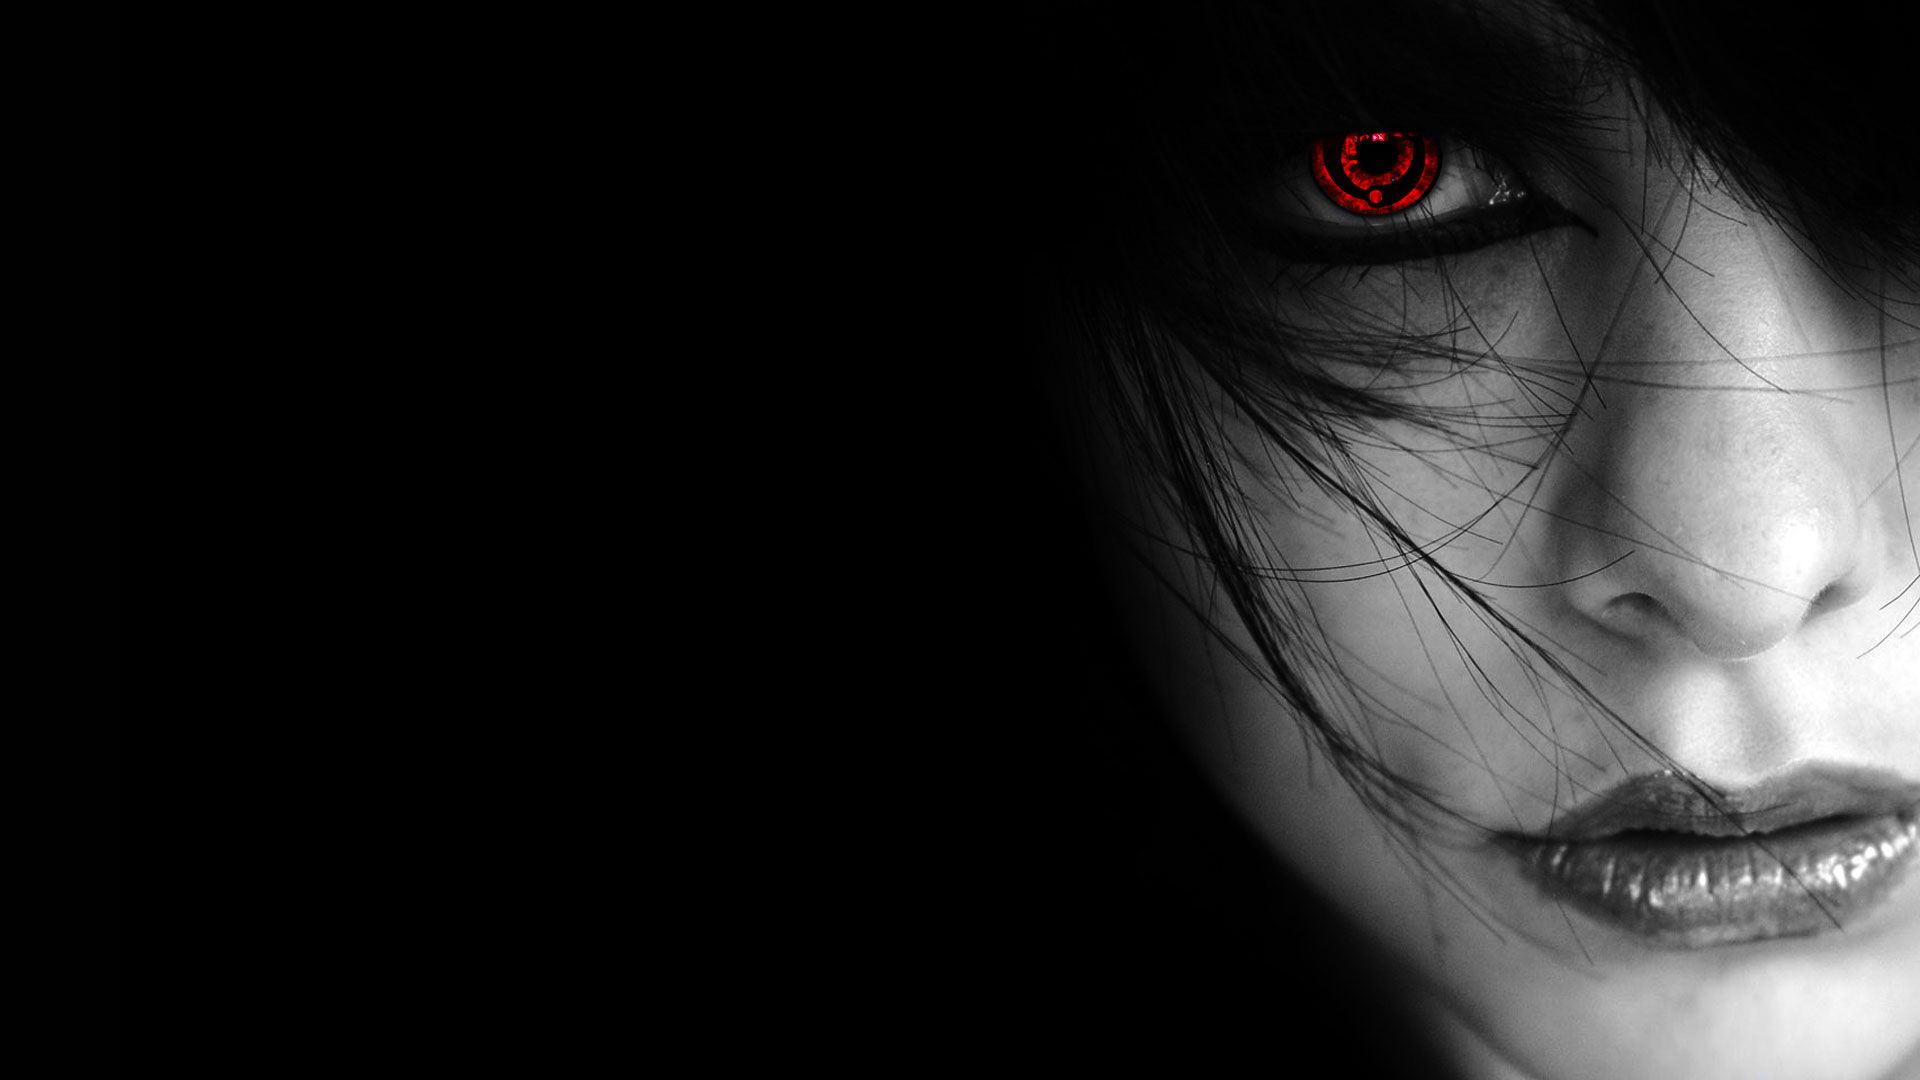 HD Pics Photos Cute Girl With Red Eye Neon Quality Desktop